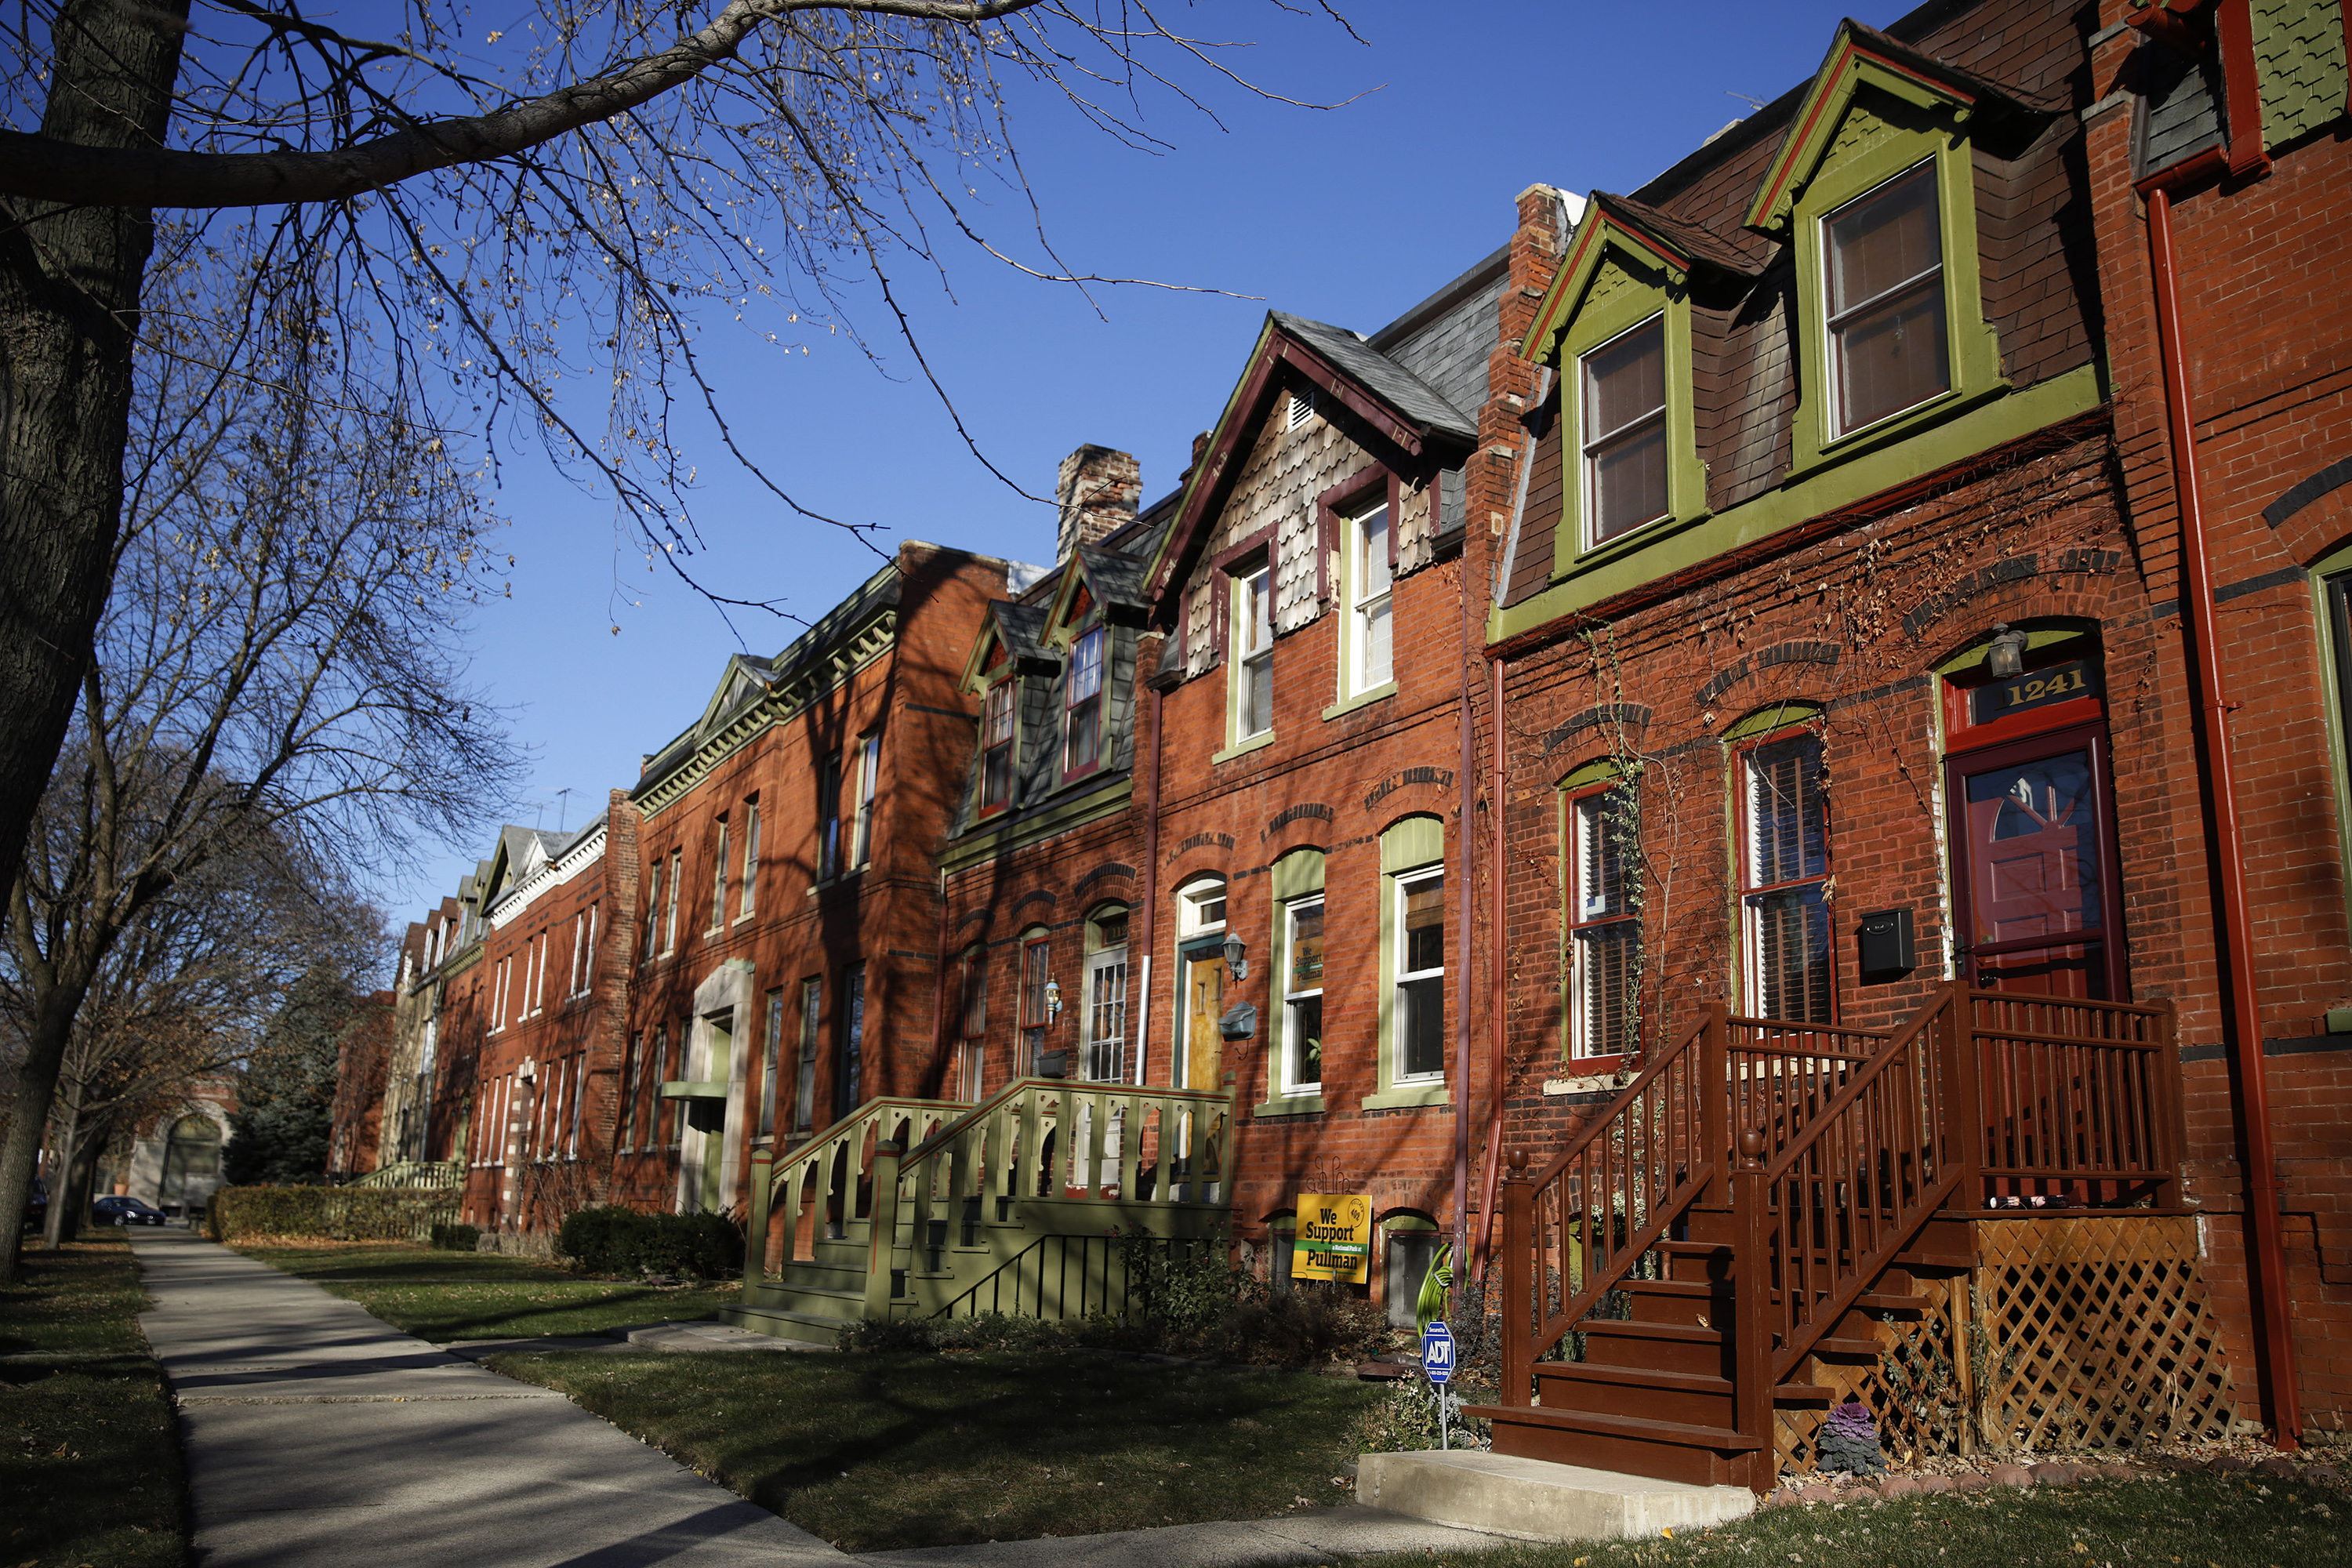 How Are Communities Making Housing More Affordable For Middle Income Families